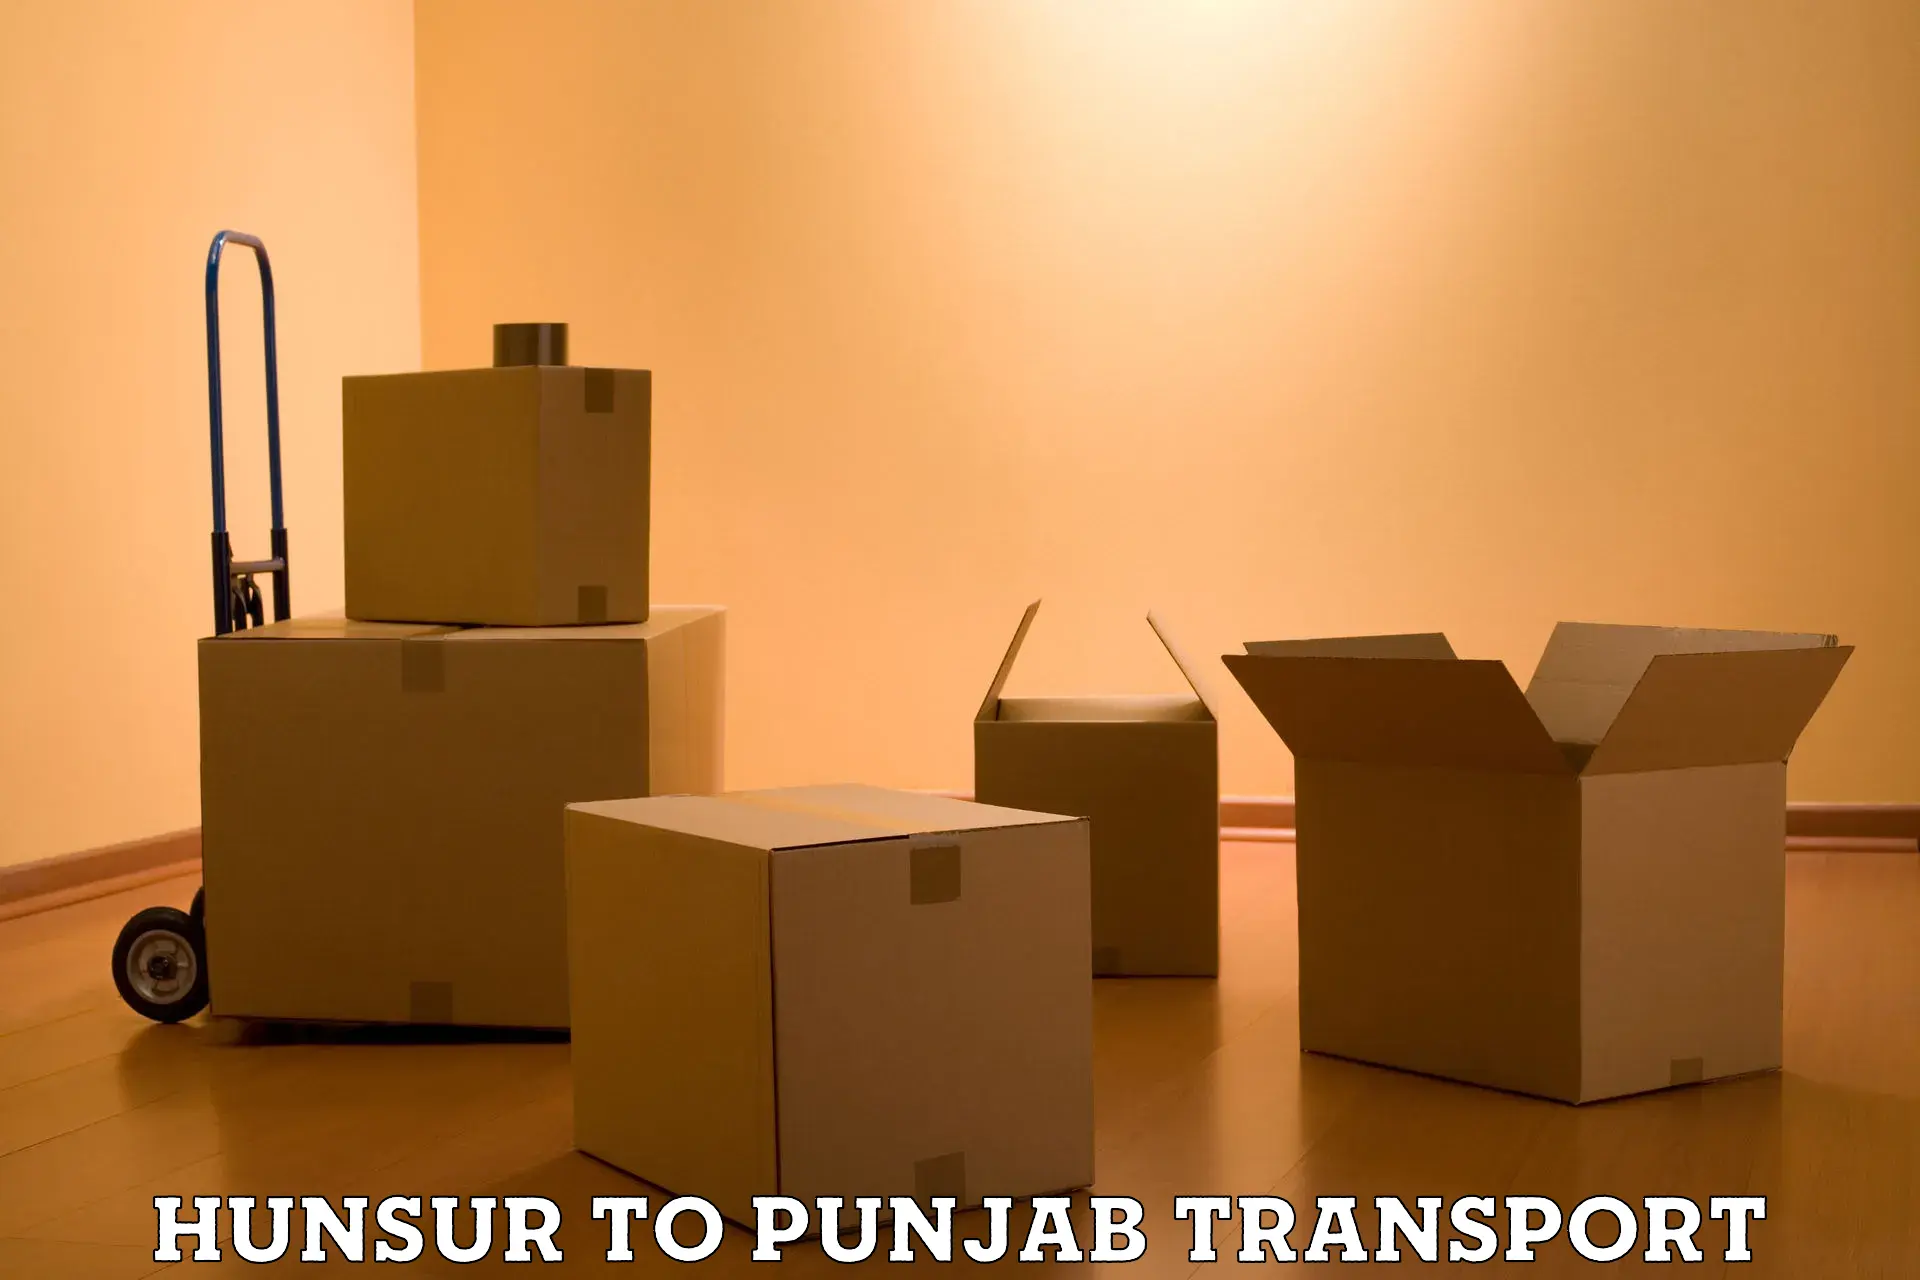 Nearby transport service in Hunsur to Punjab